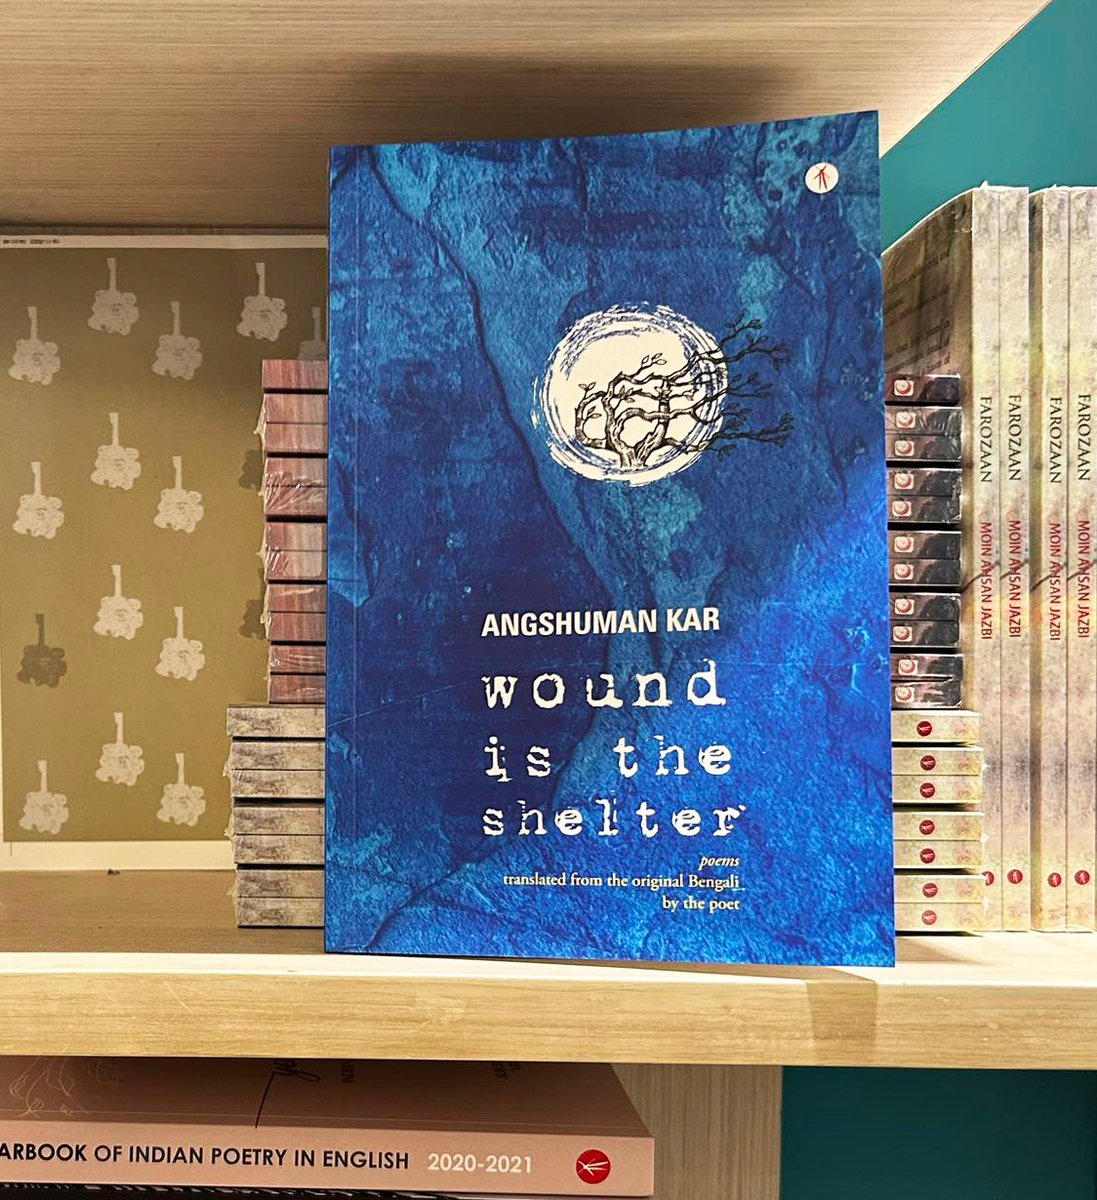 New arrival — Angshuman Kar's 'Wound is the Shelter.' 

#Translation #Poetry #BengaliPoetry #WorldLiterature